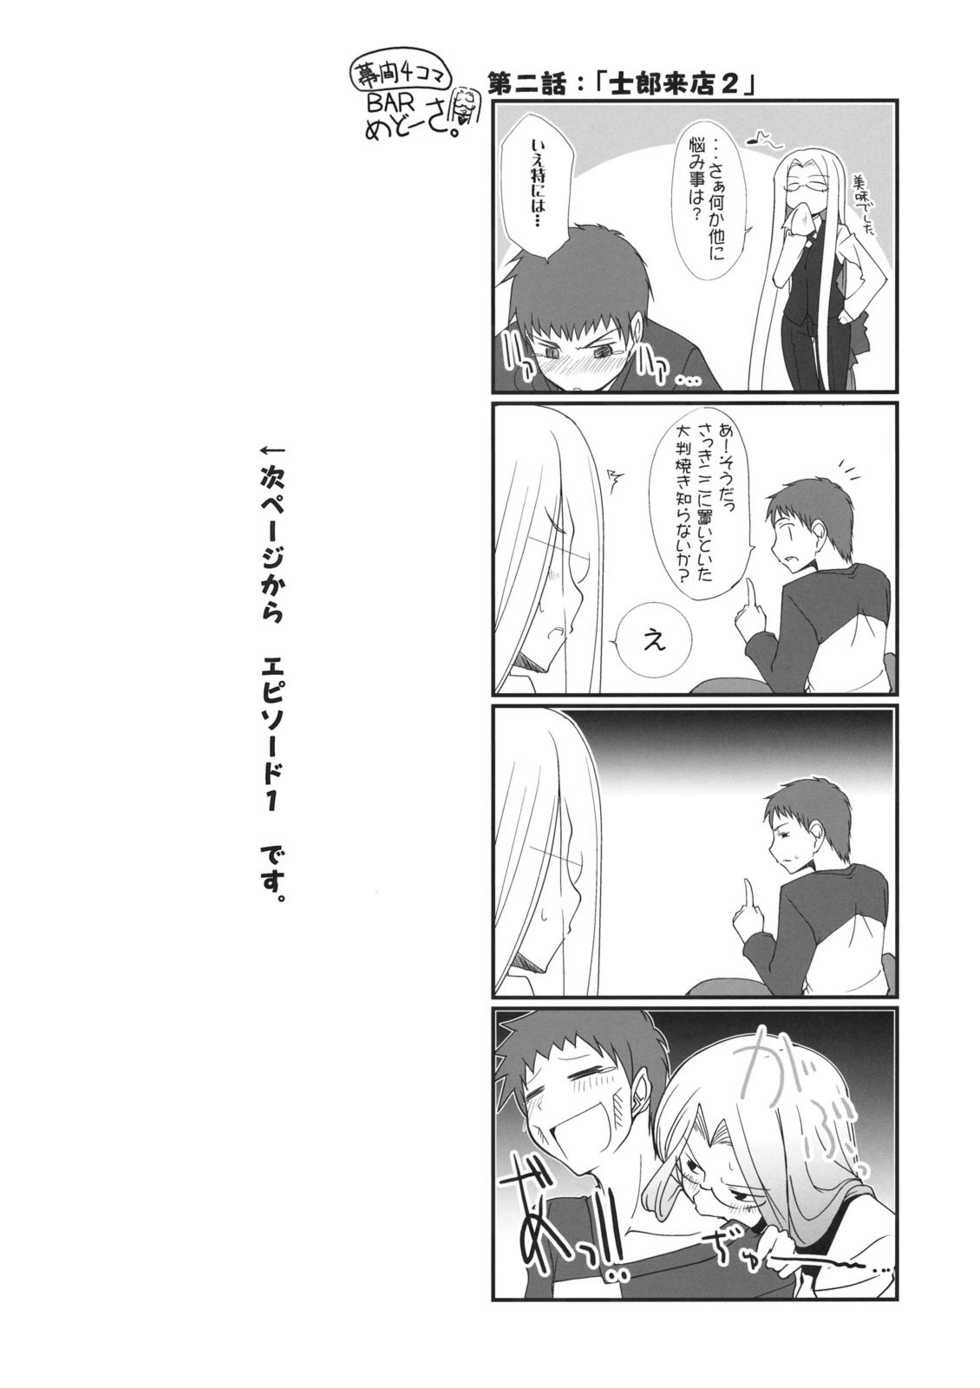 (SC39) [Ronpaia (Fue)] One Day! Vol. 10 (Fate/stay night) - Page 5